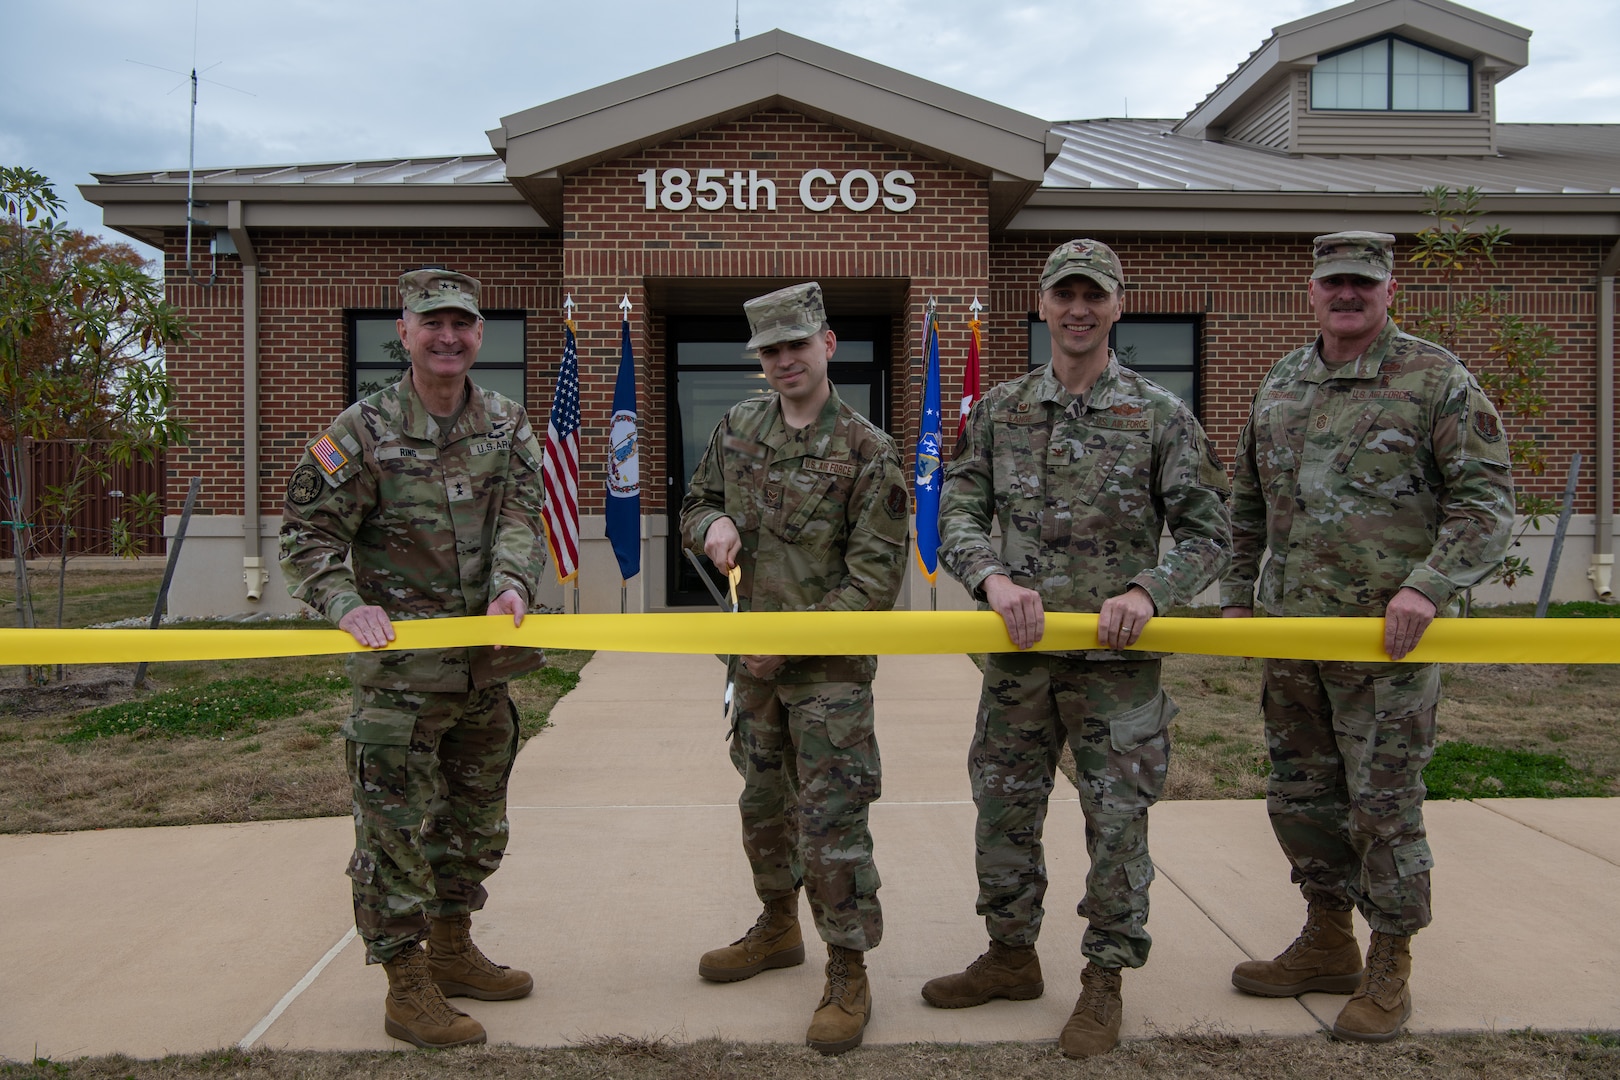 Four military members holding ribbon, one cutting with scissors.